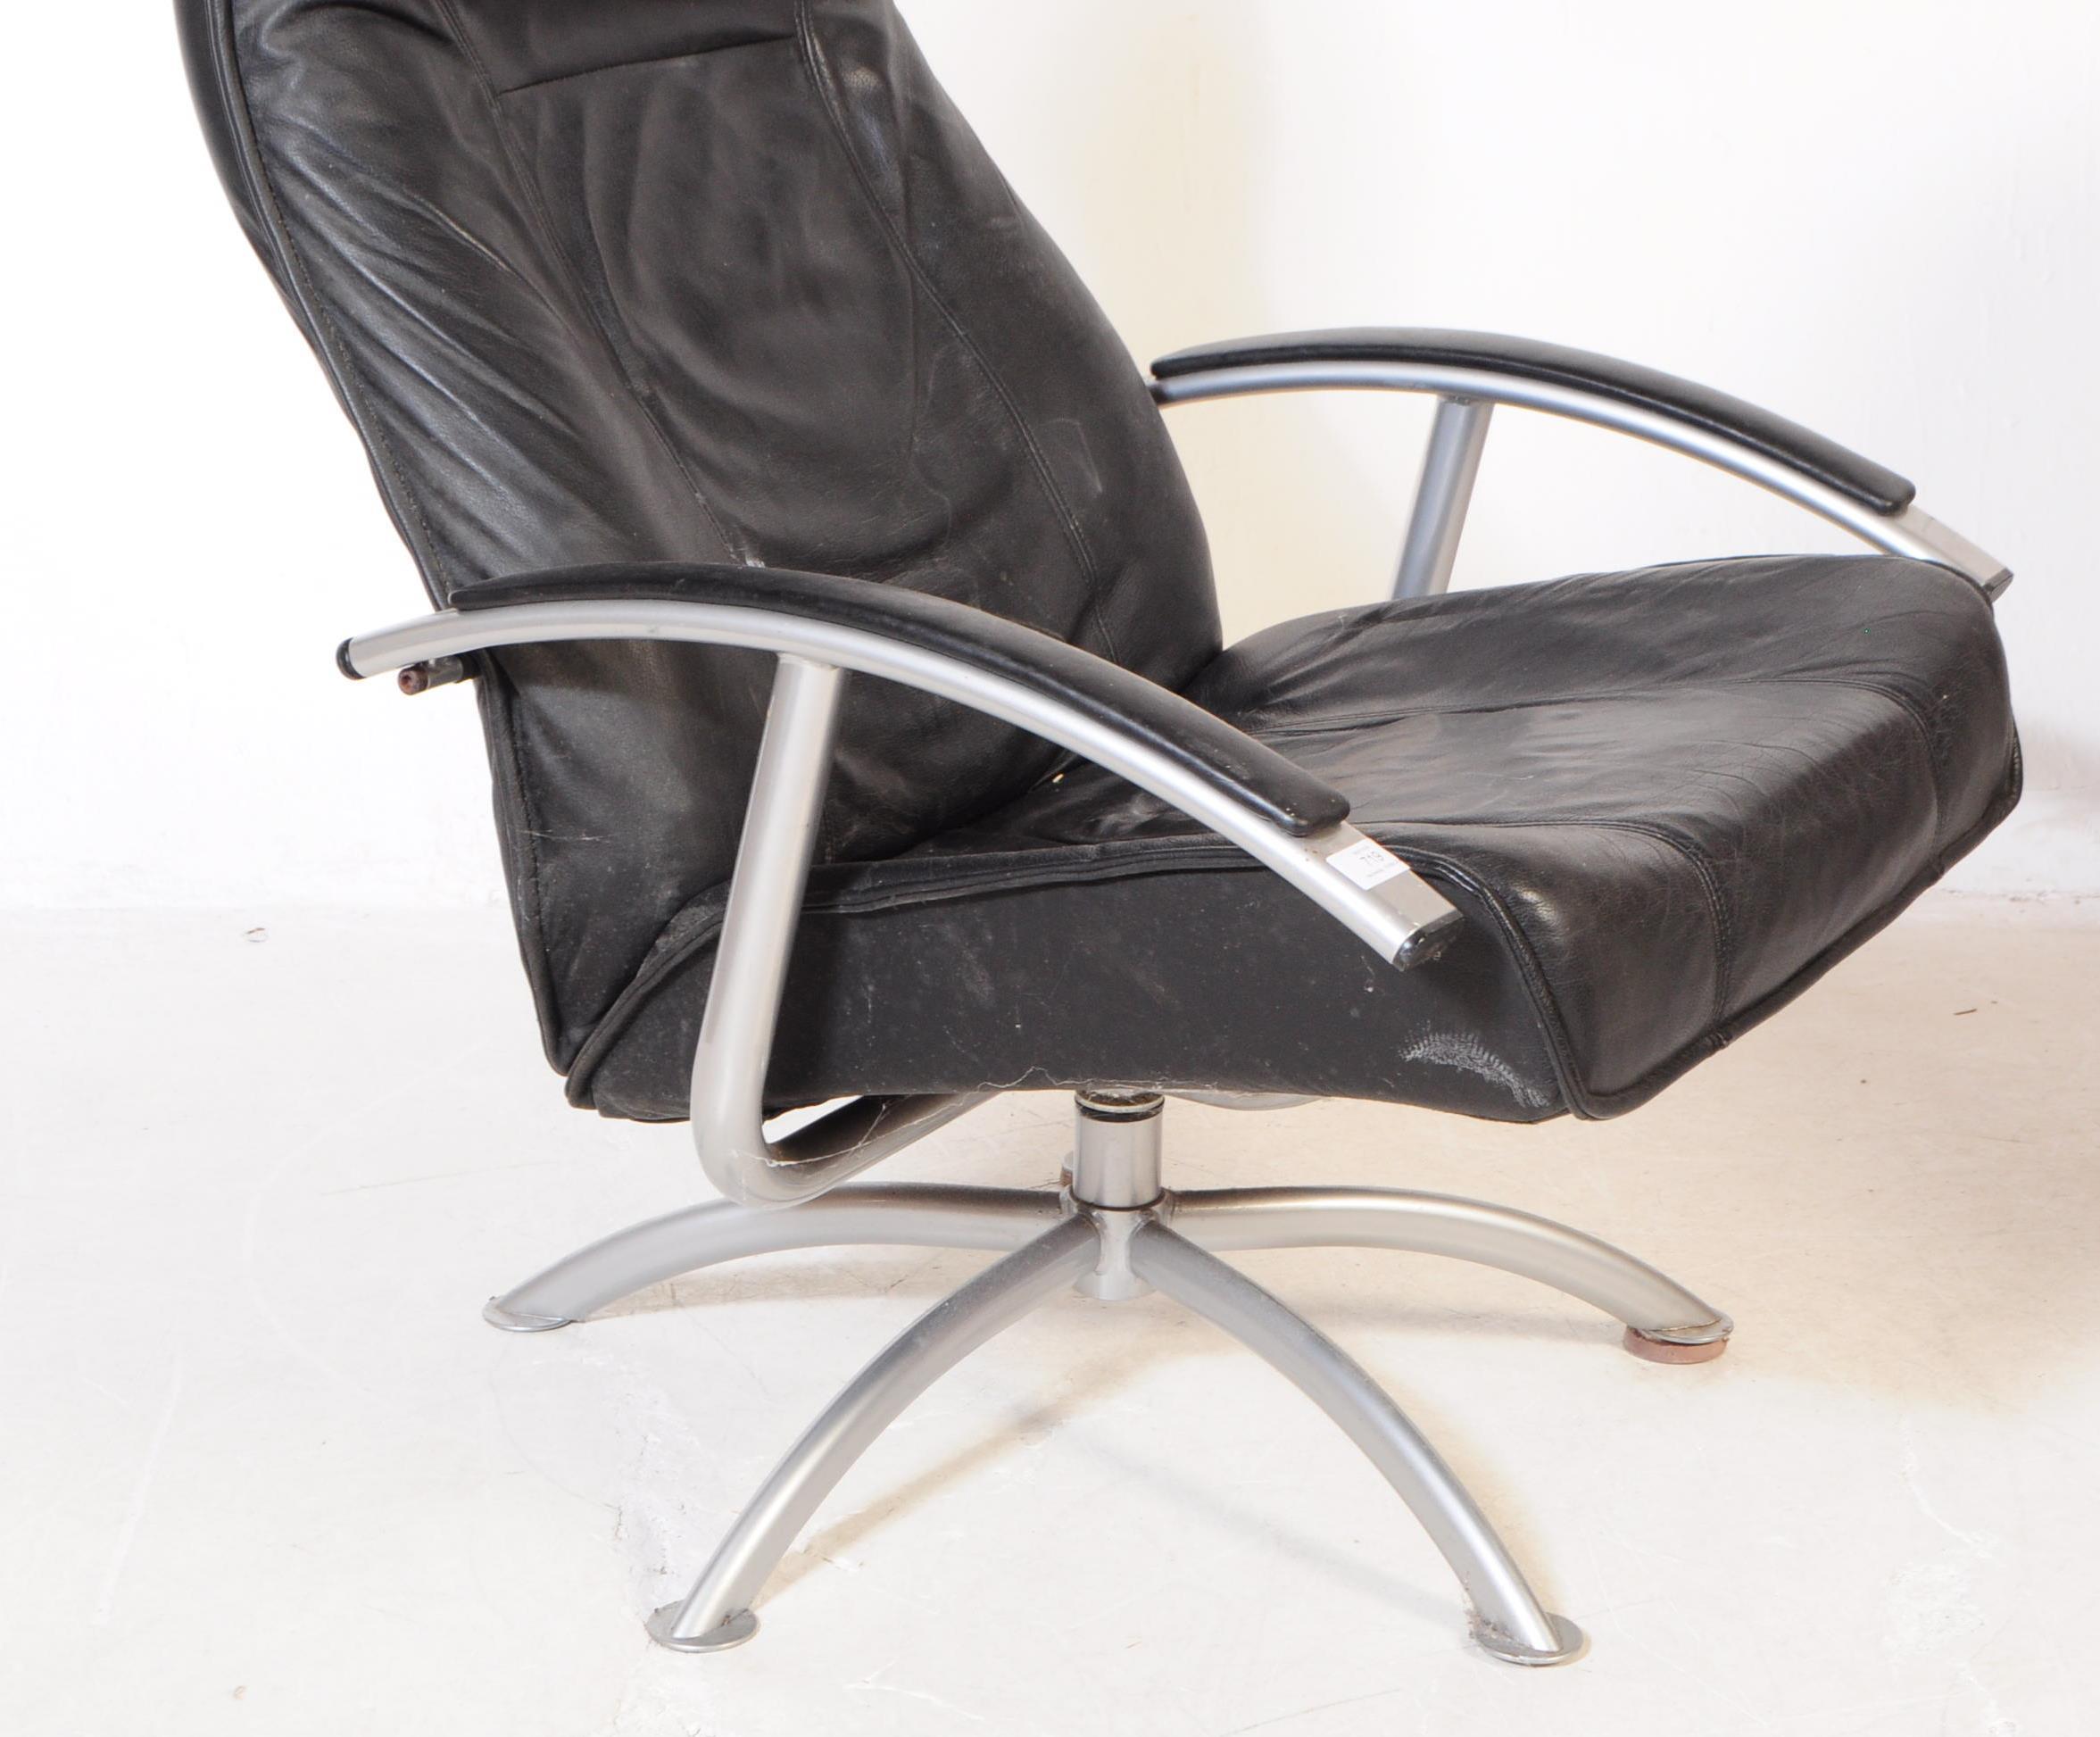 CONTEMPORARY LEATHER SWIVEL ARMCHAIR - Image 2 of 4